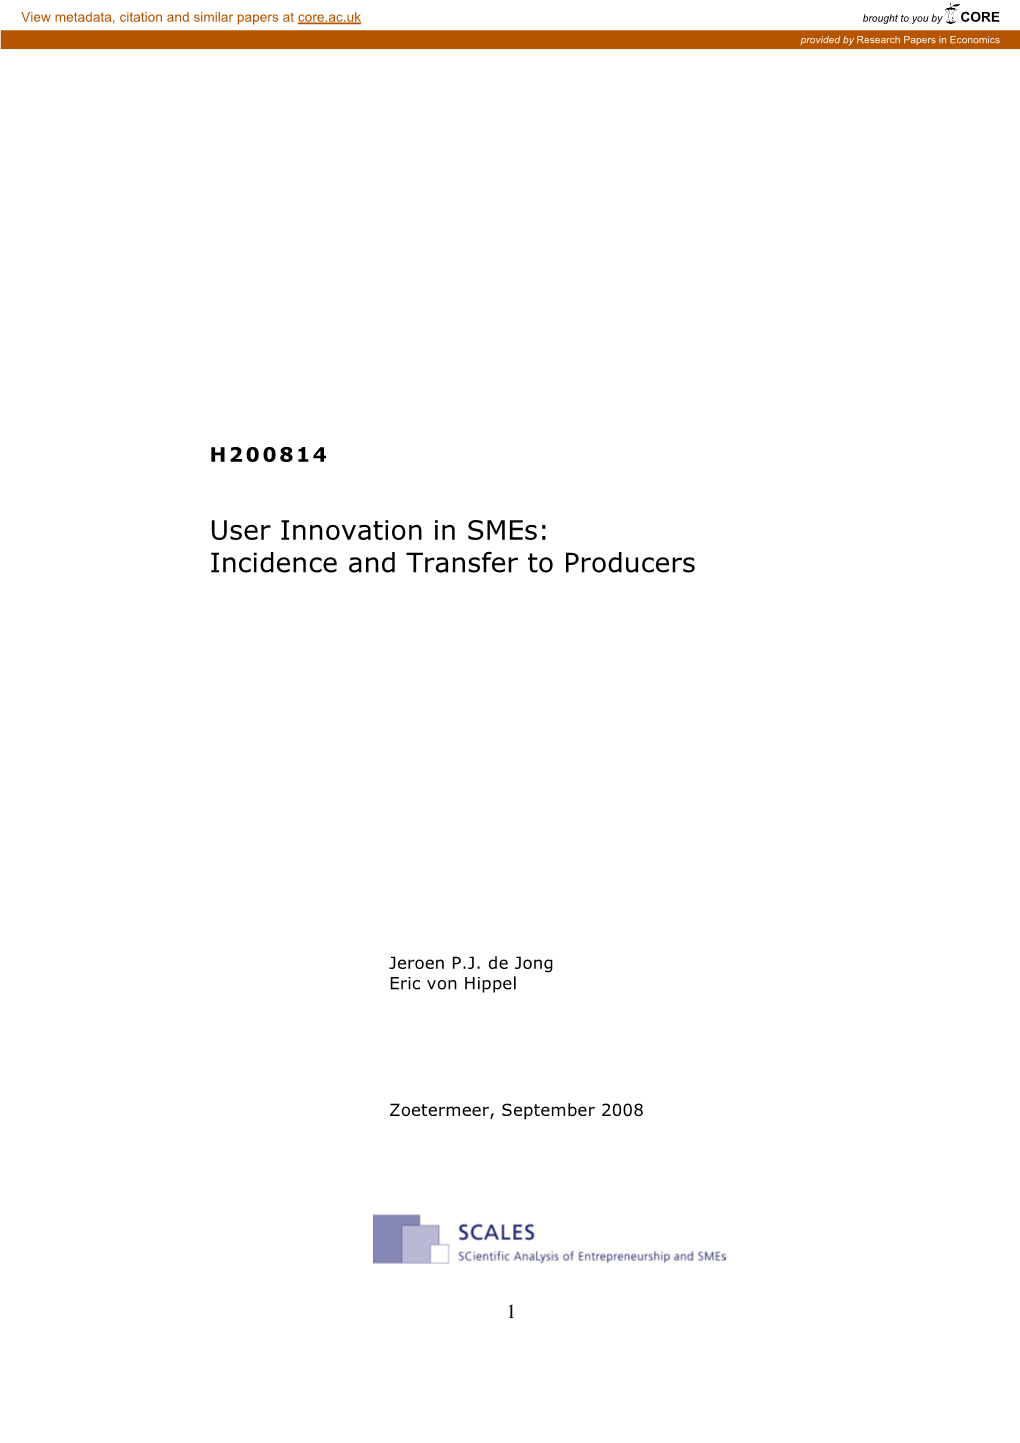 User Innovation in Smes: Incidence and Transfer to Producers